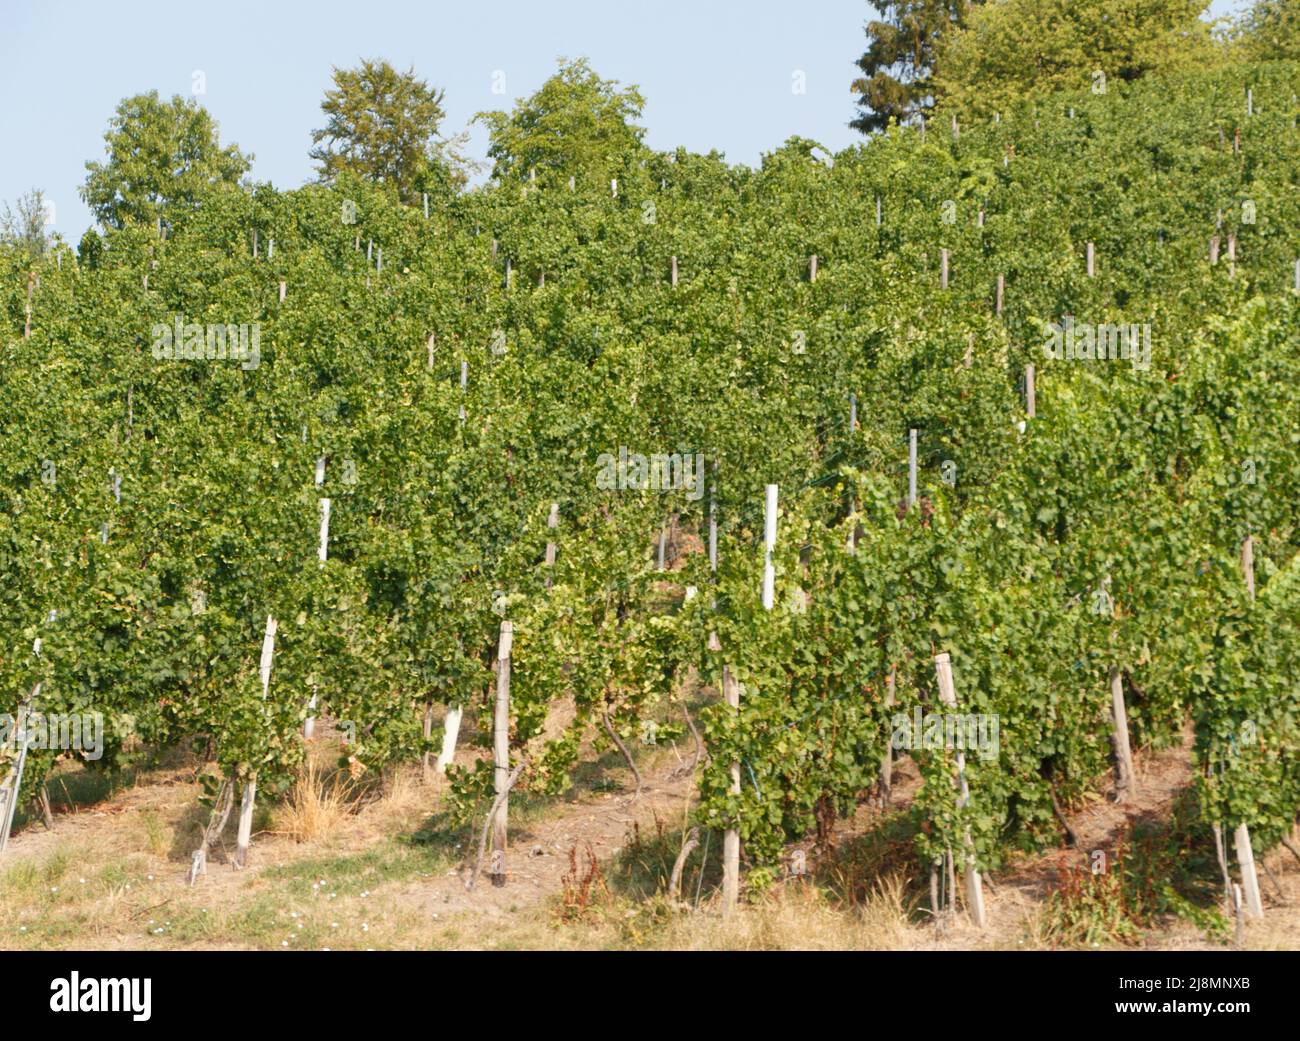 Vineyard on a hill in France during summer Stock Photo